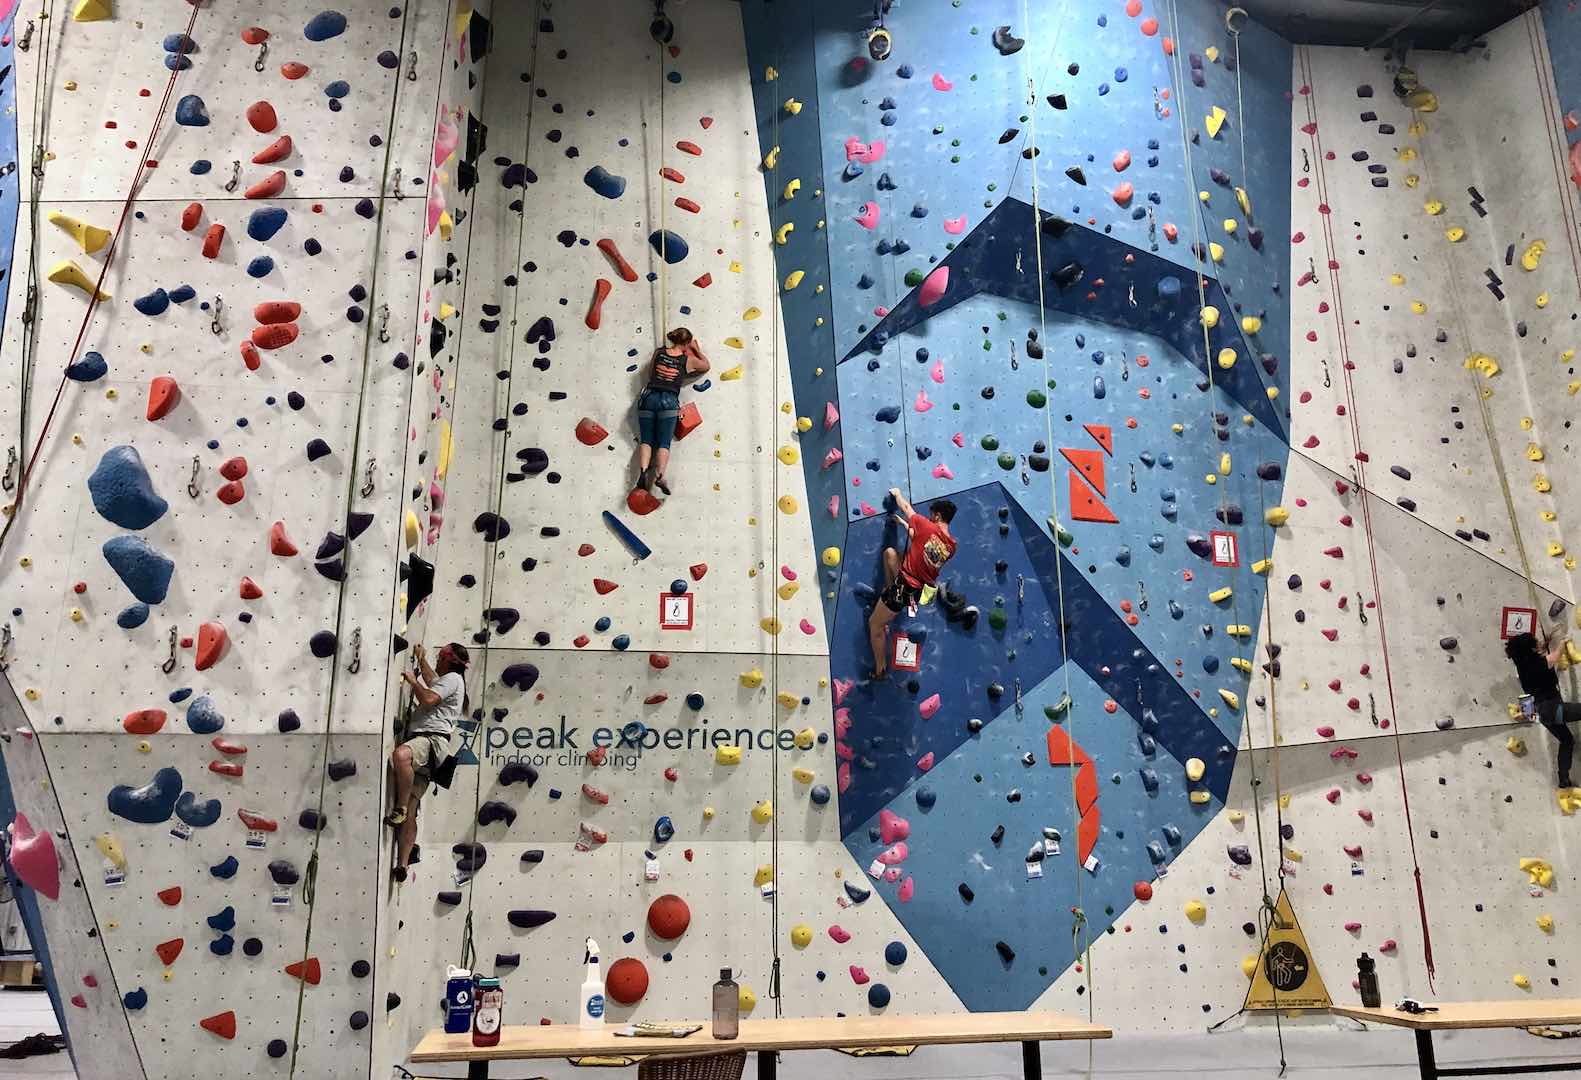 Jenni taking on her latest climbing route challenge at our home gym.